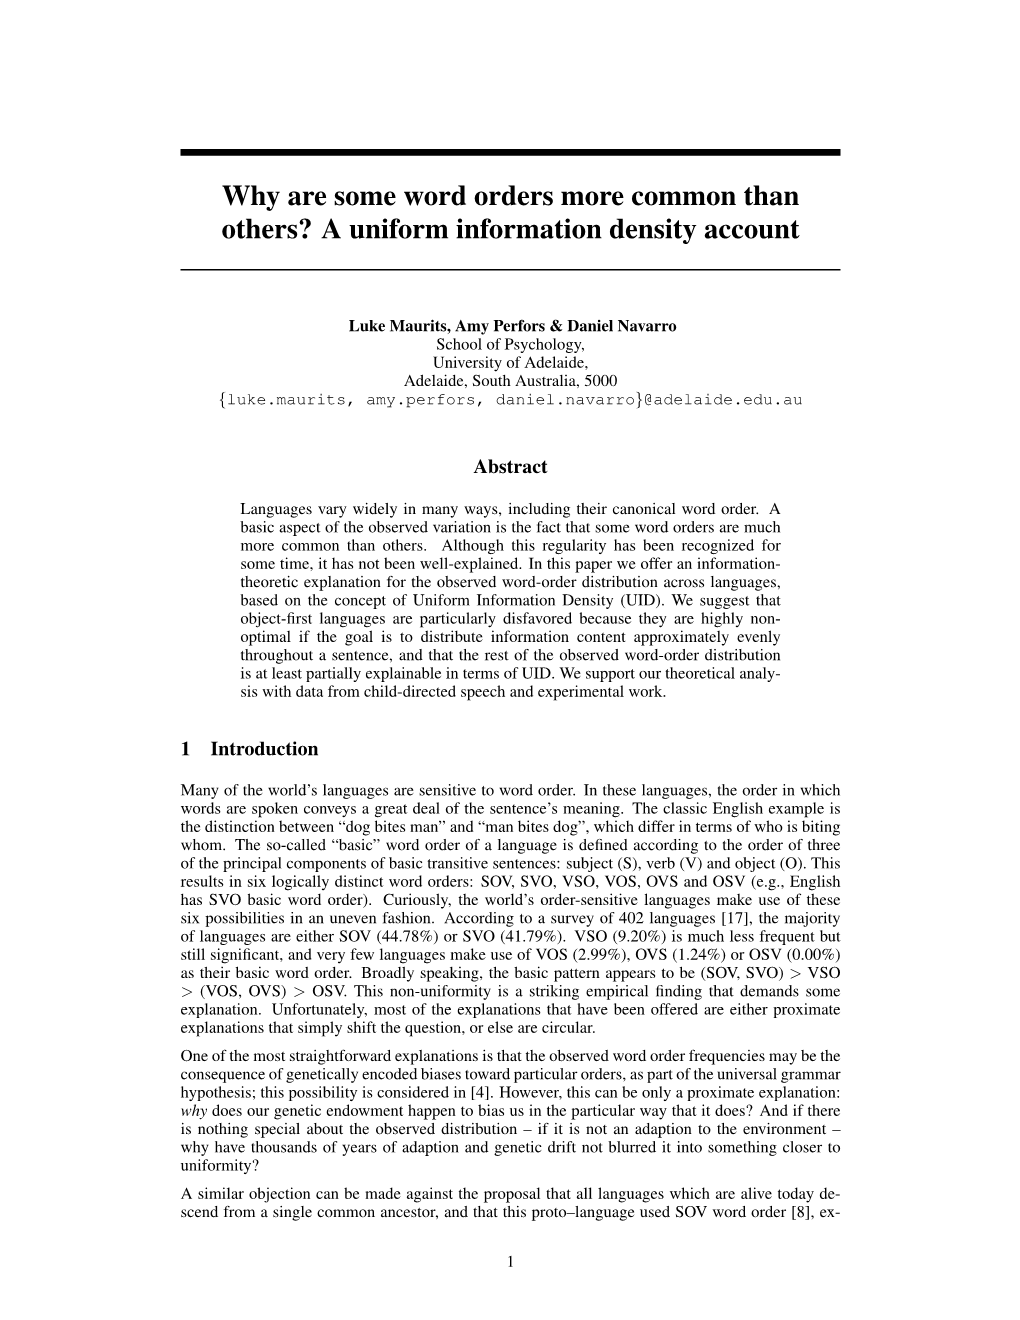 Why Are Some Word Orders More Common Than Others? a Uniform Information Density Account